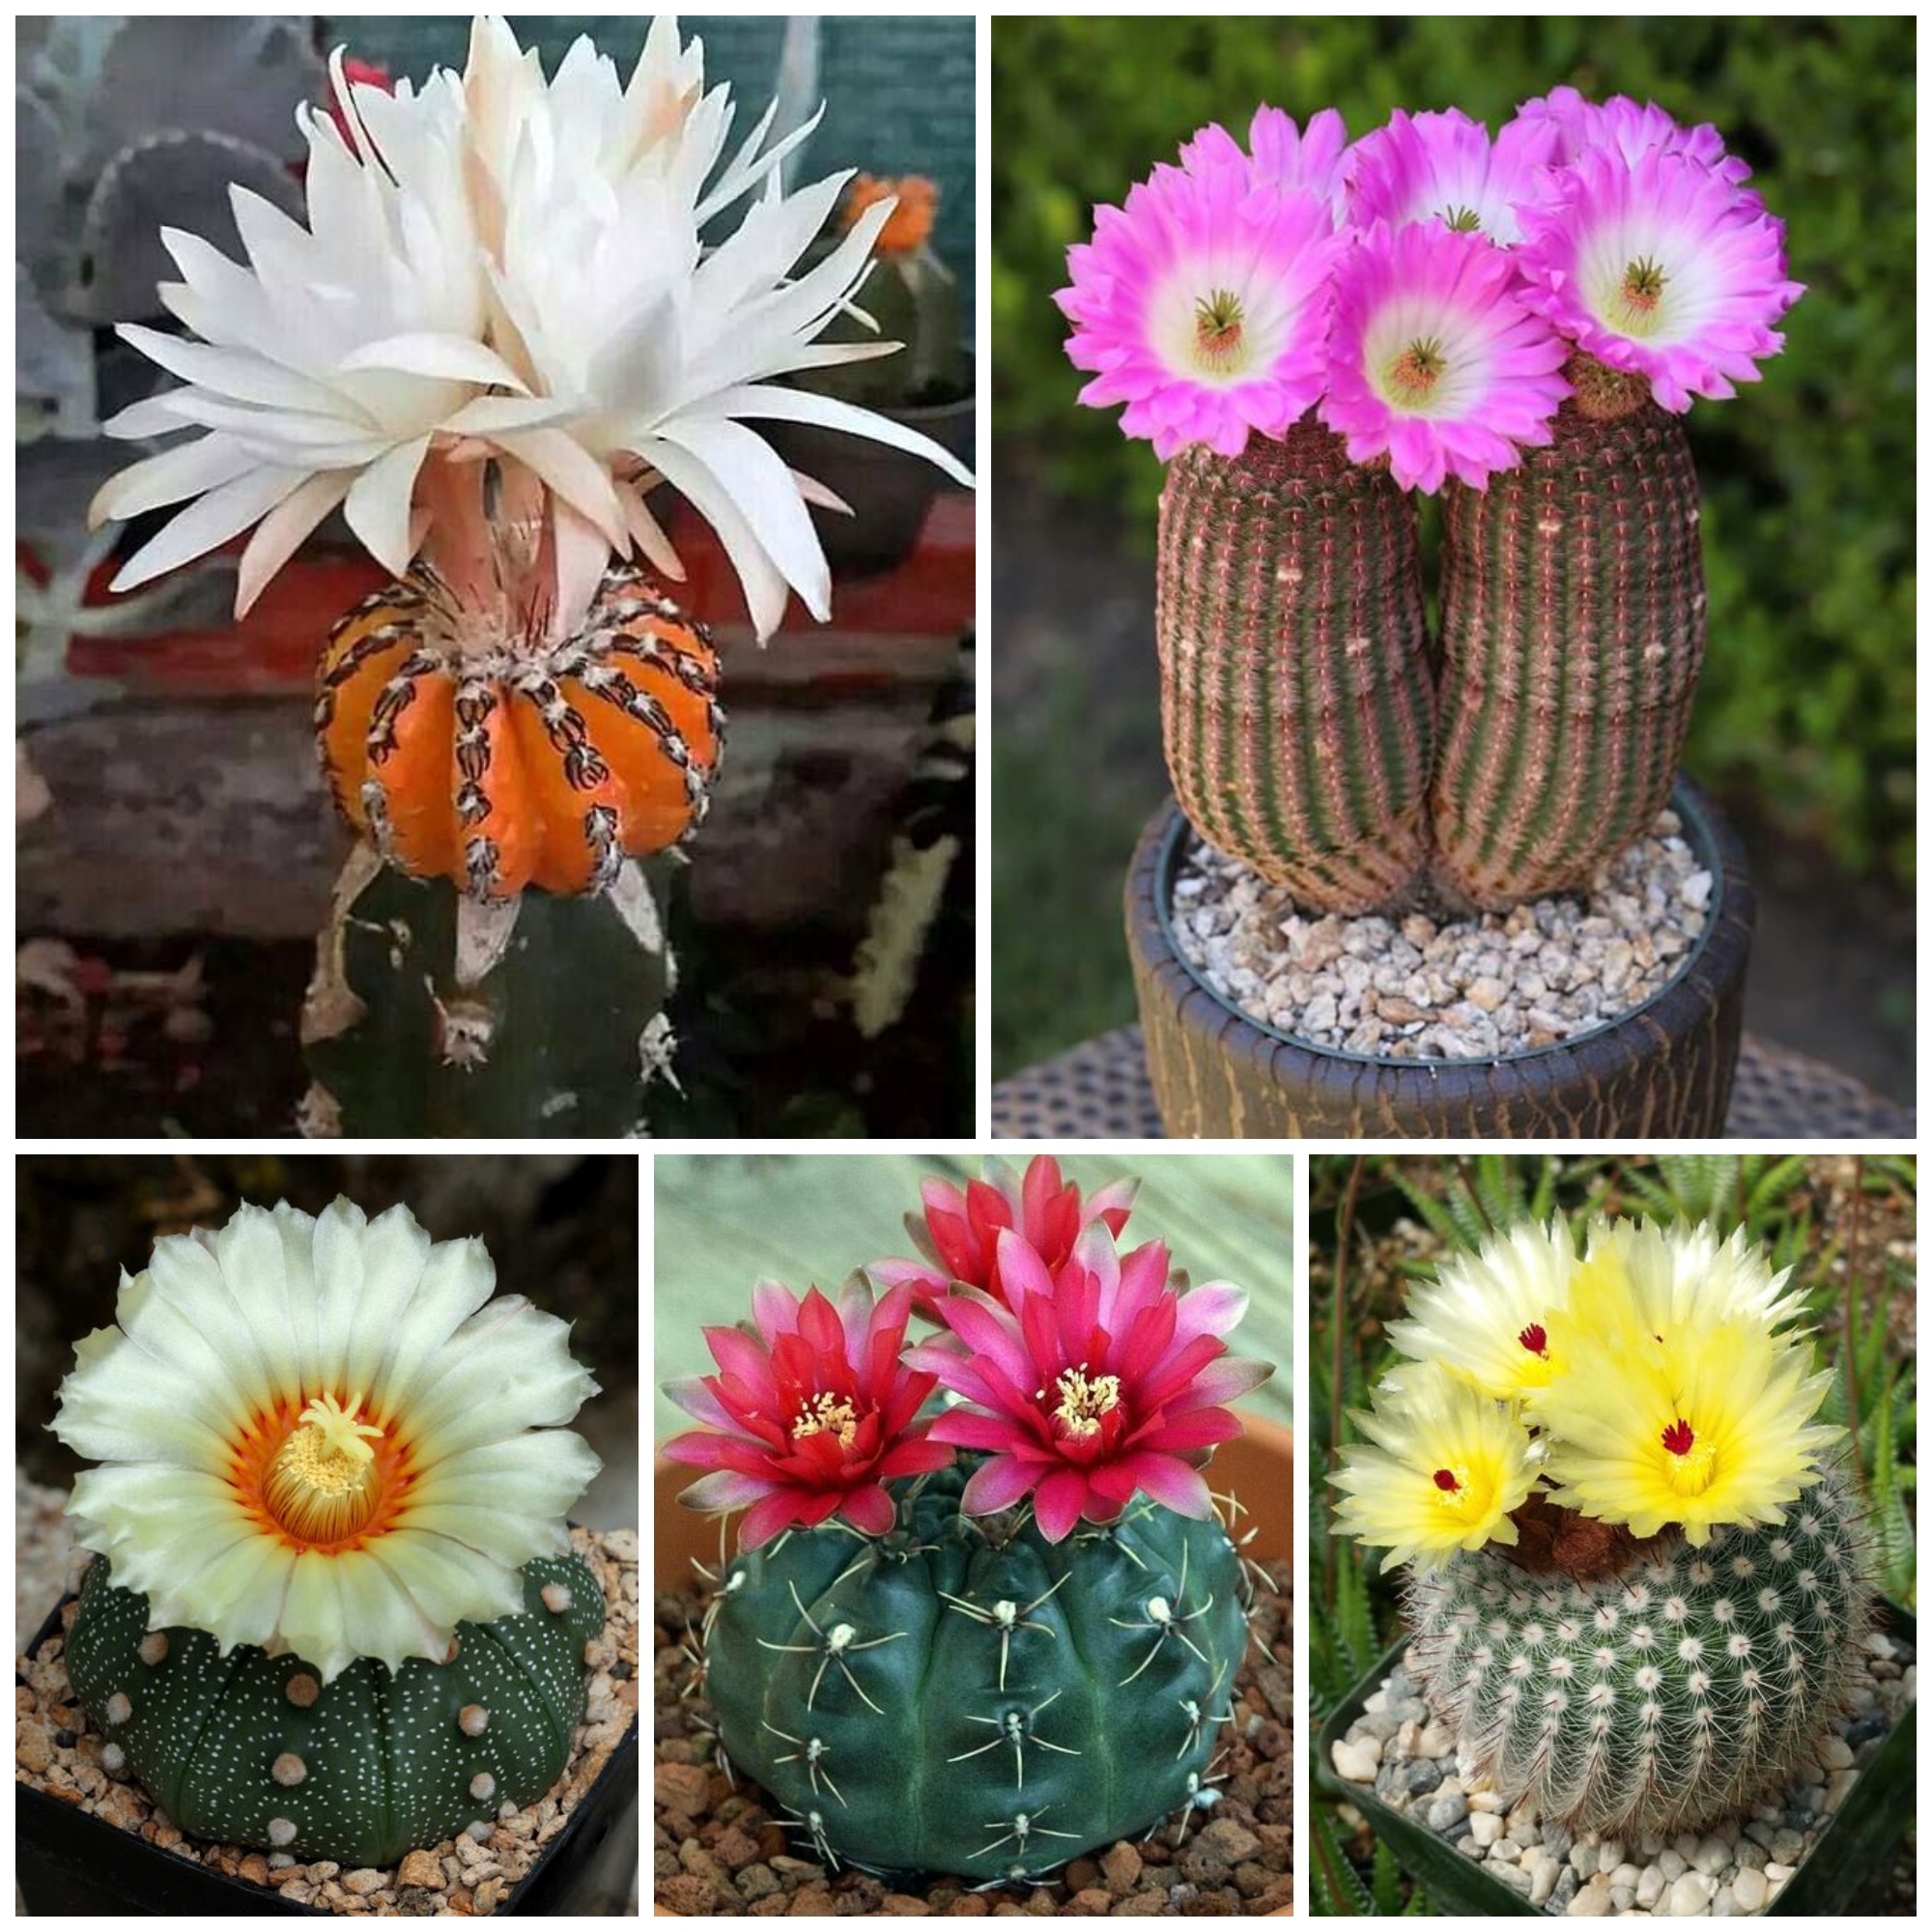 How to Get Your Cactus to Flower